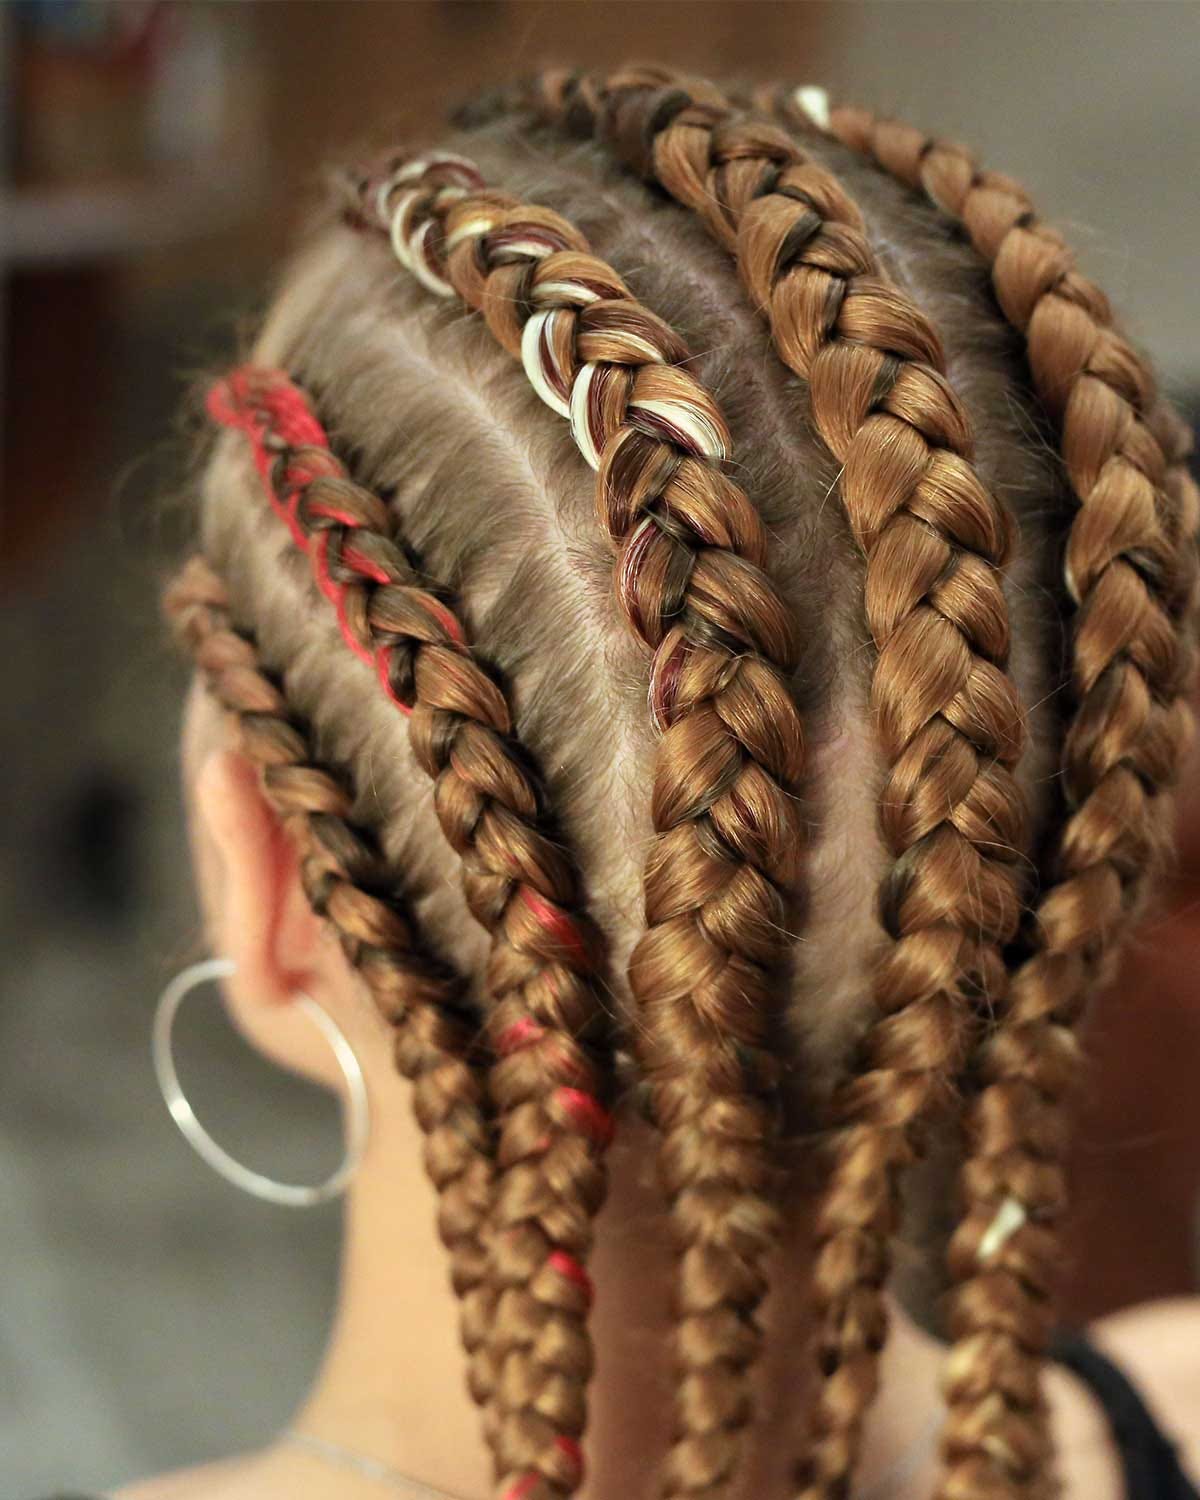 Braided Hairstyles — Because girls really like braided hairstyles, by  Virgo hair braiding salon